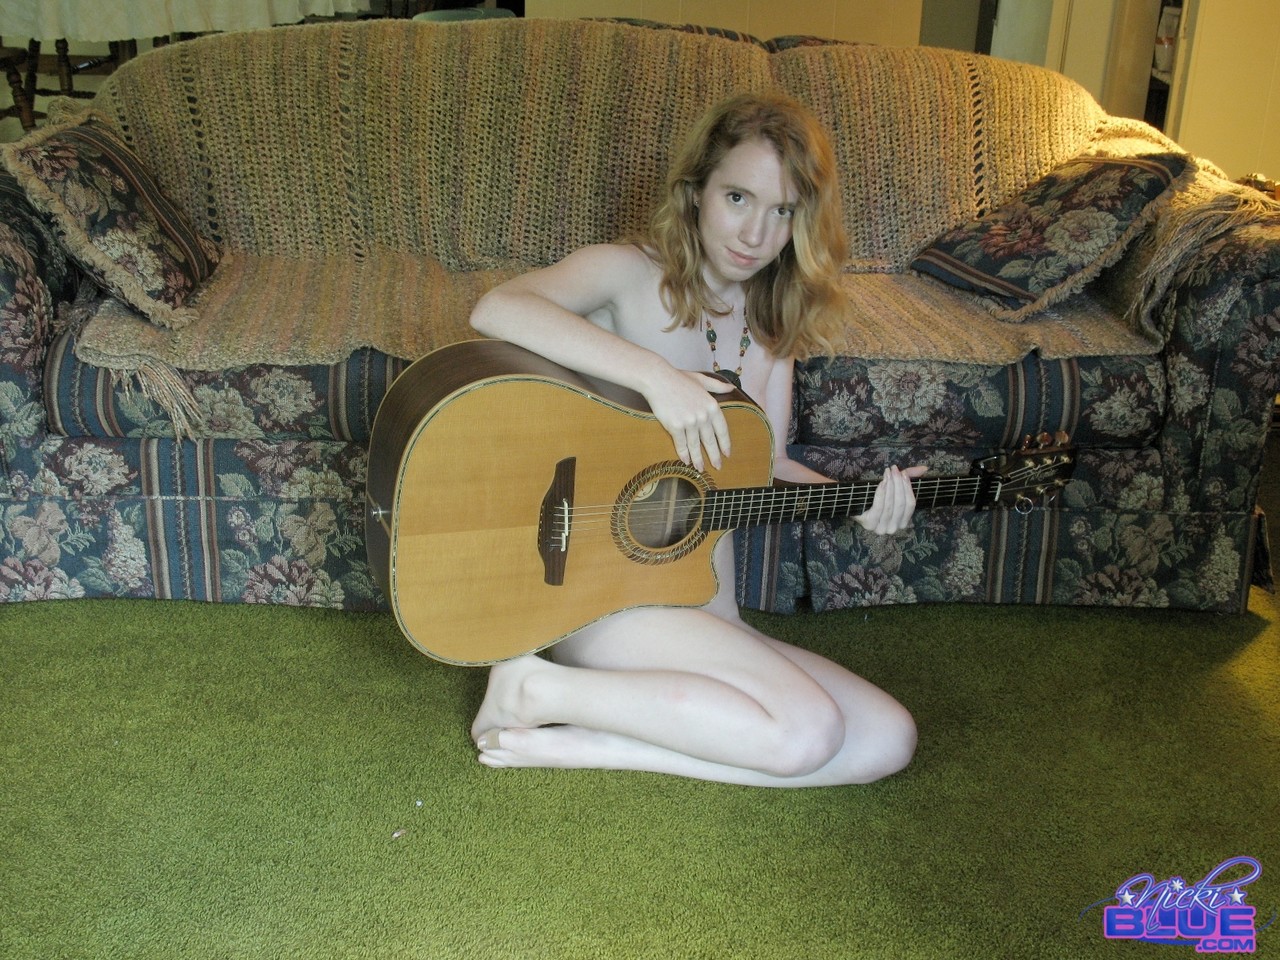 19-year-old babe Nicki Blue posing nude with a guitar in her hands porn photo #424548935